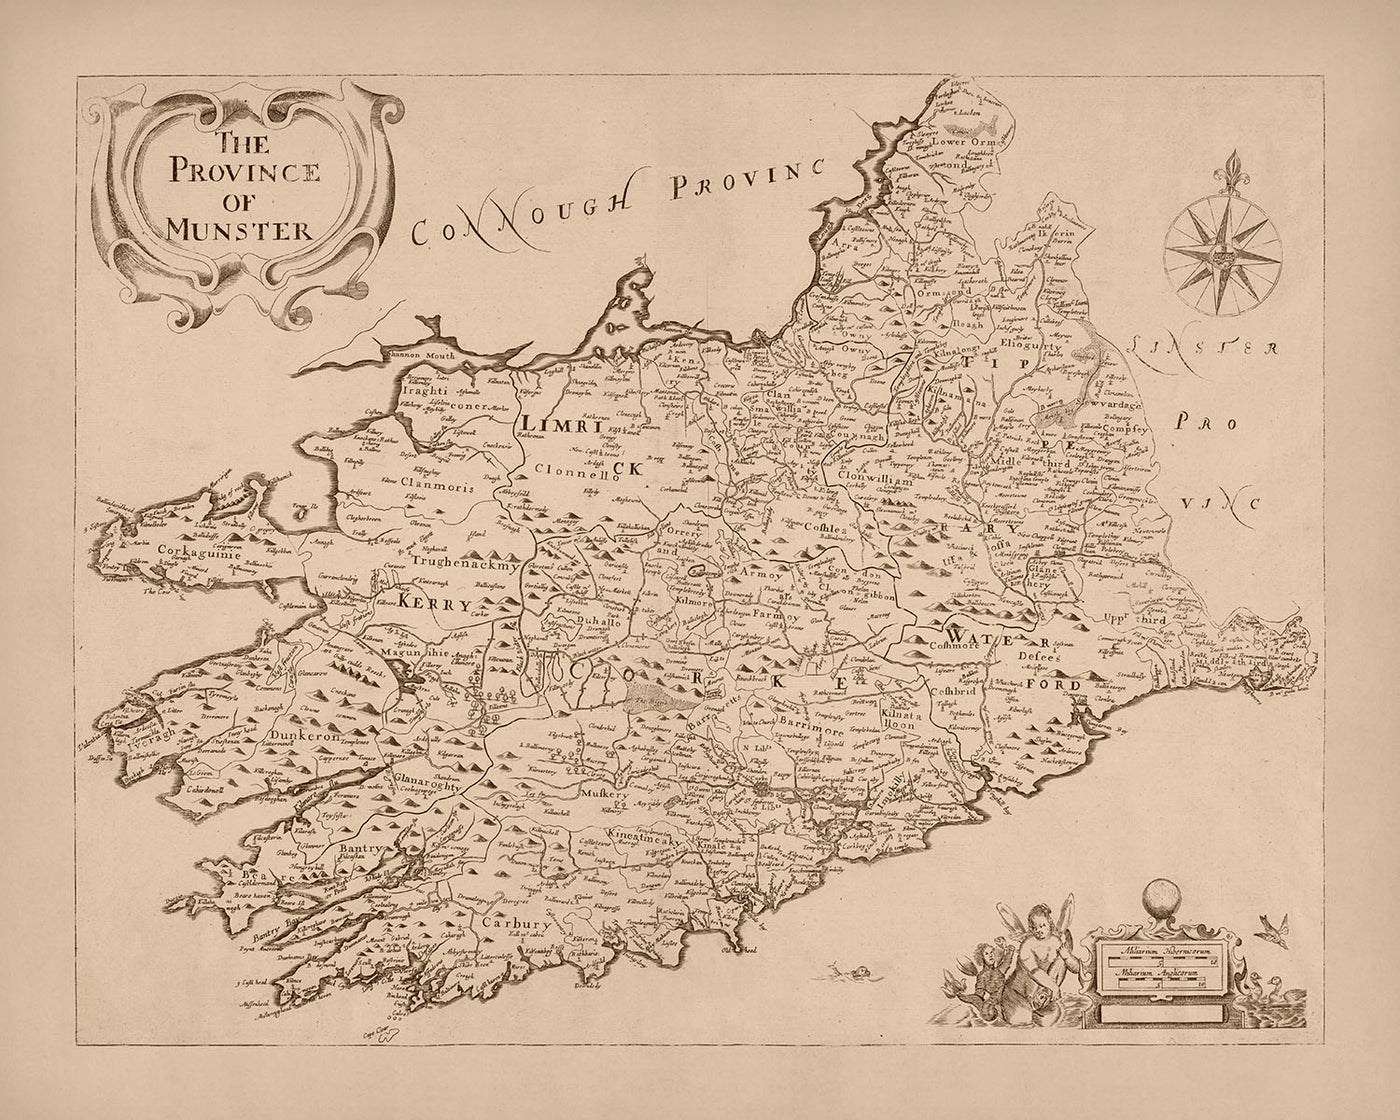 Old Map of Munster by Petty, 1685: Cork, Limerick, Waterford, Ennis, Tralee, Clonmel